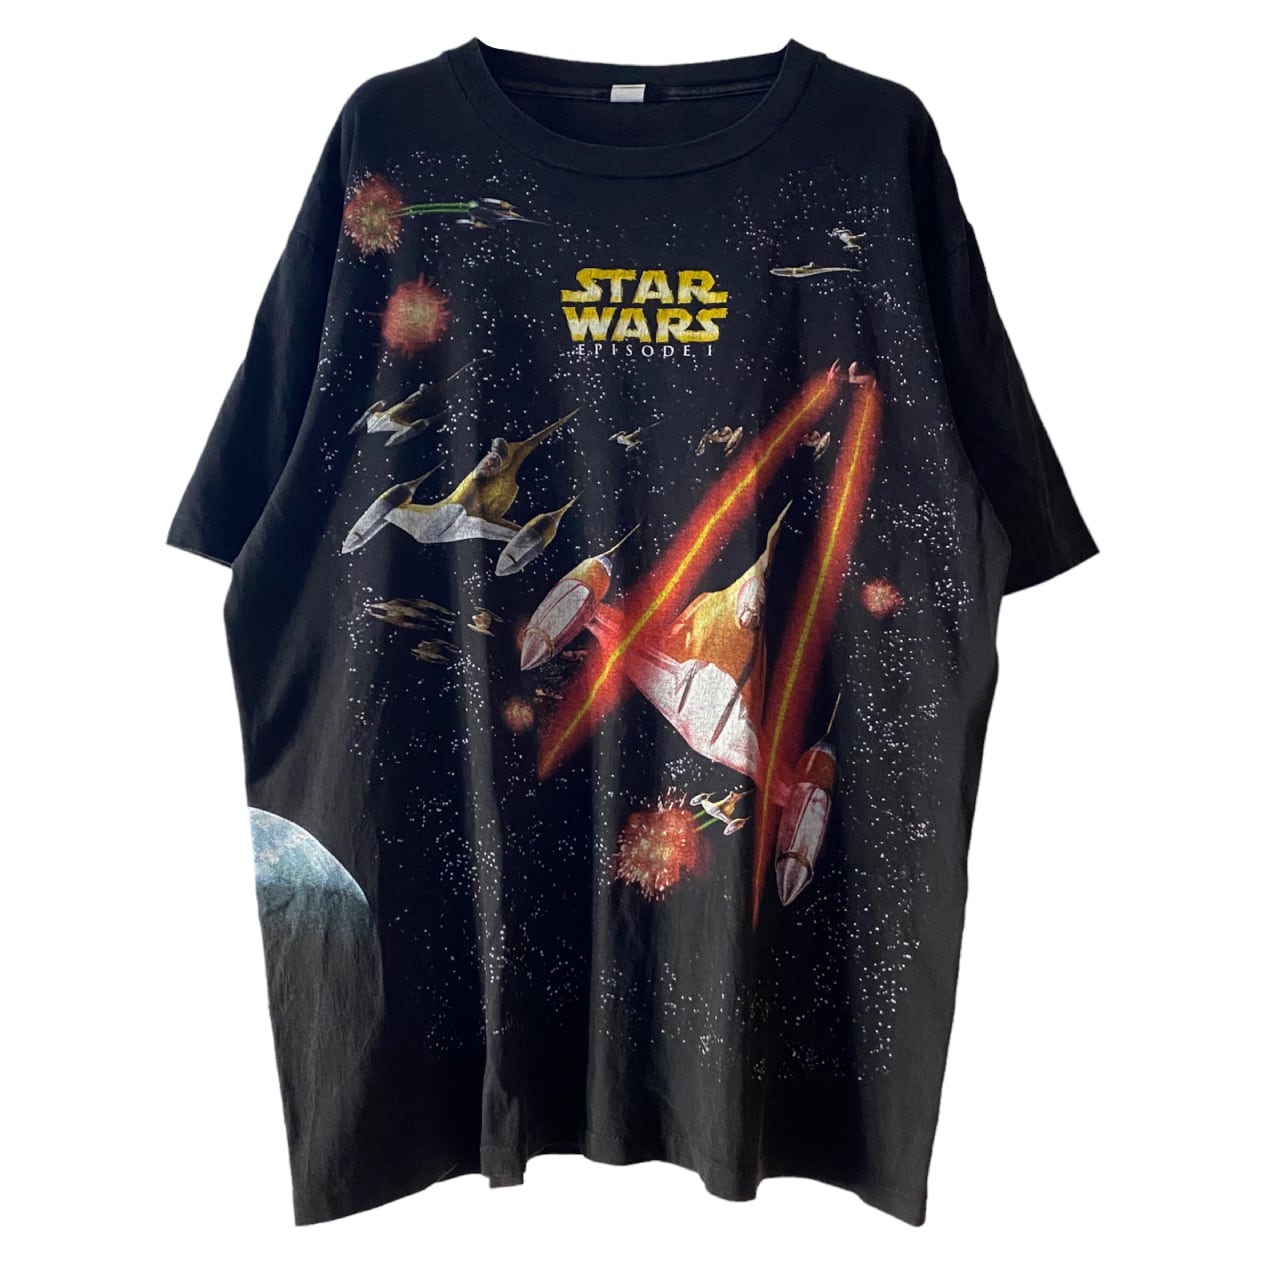 Star Wars 90s Episode 1 Movie Promo All Over Print Tee